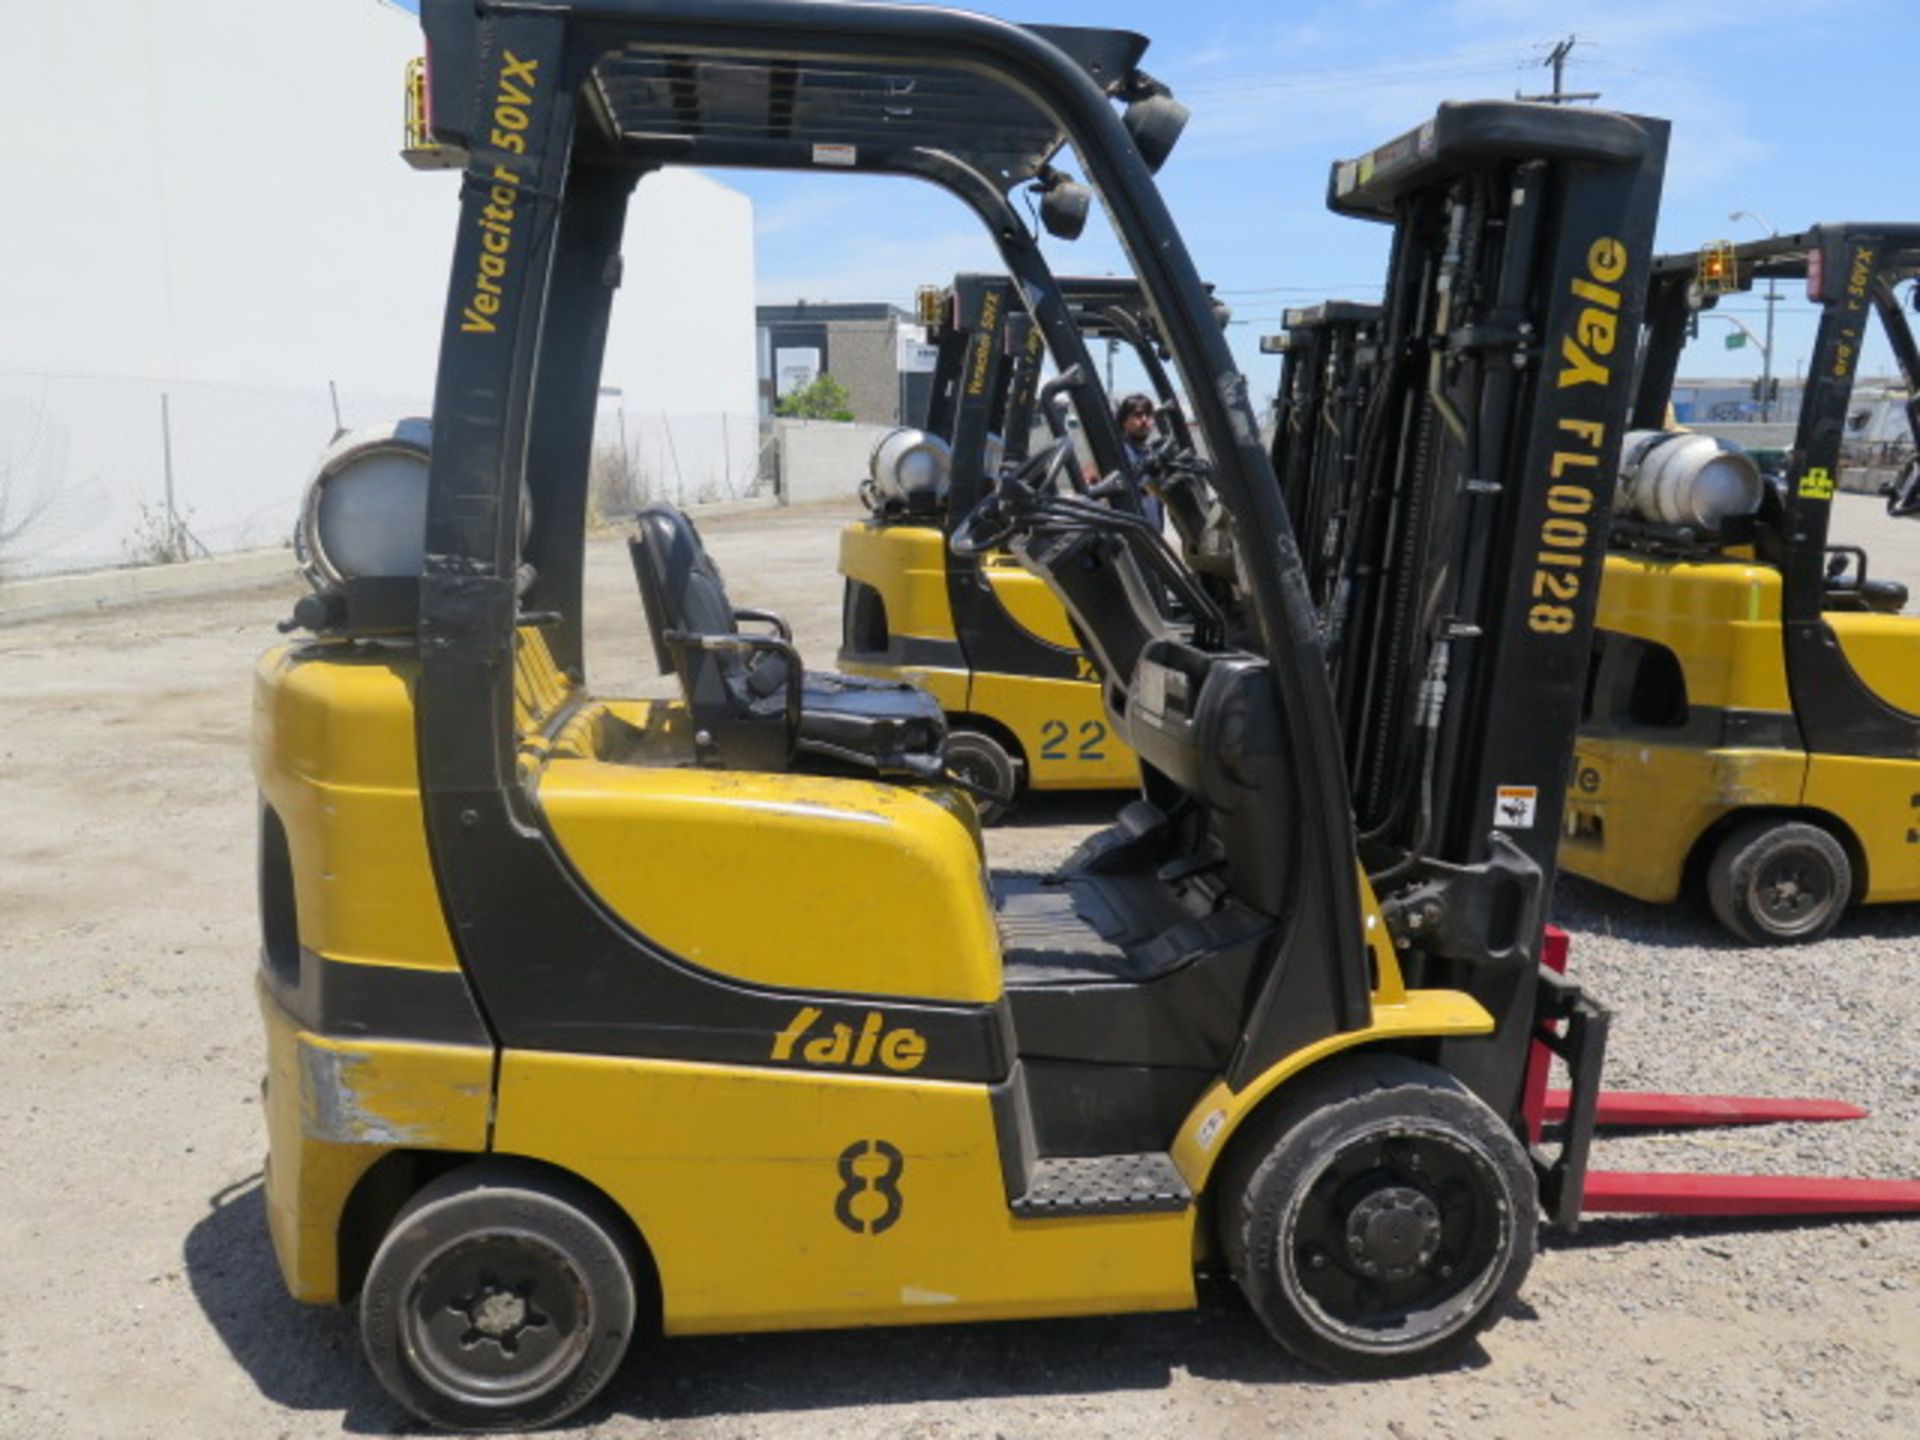 2012 Yale GLC050VXNVSE083 5000 Lb LPG Forklift s/n A910V17105J w/ 3-Stage, SS, 189” Lift, SOLD AS IS - Image 8 of 19